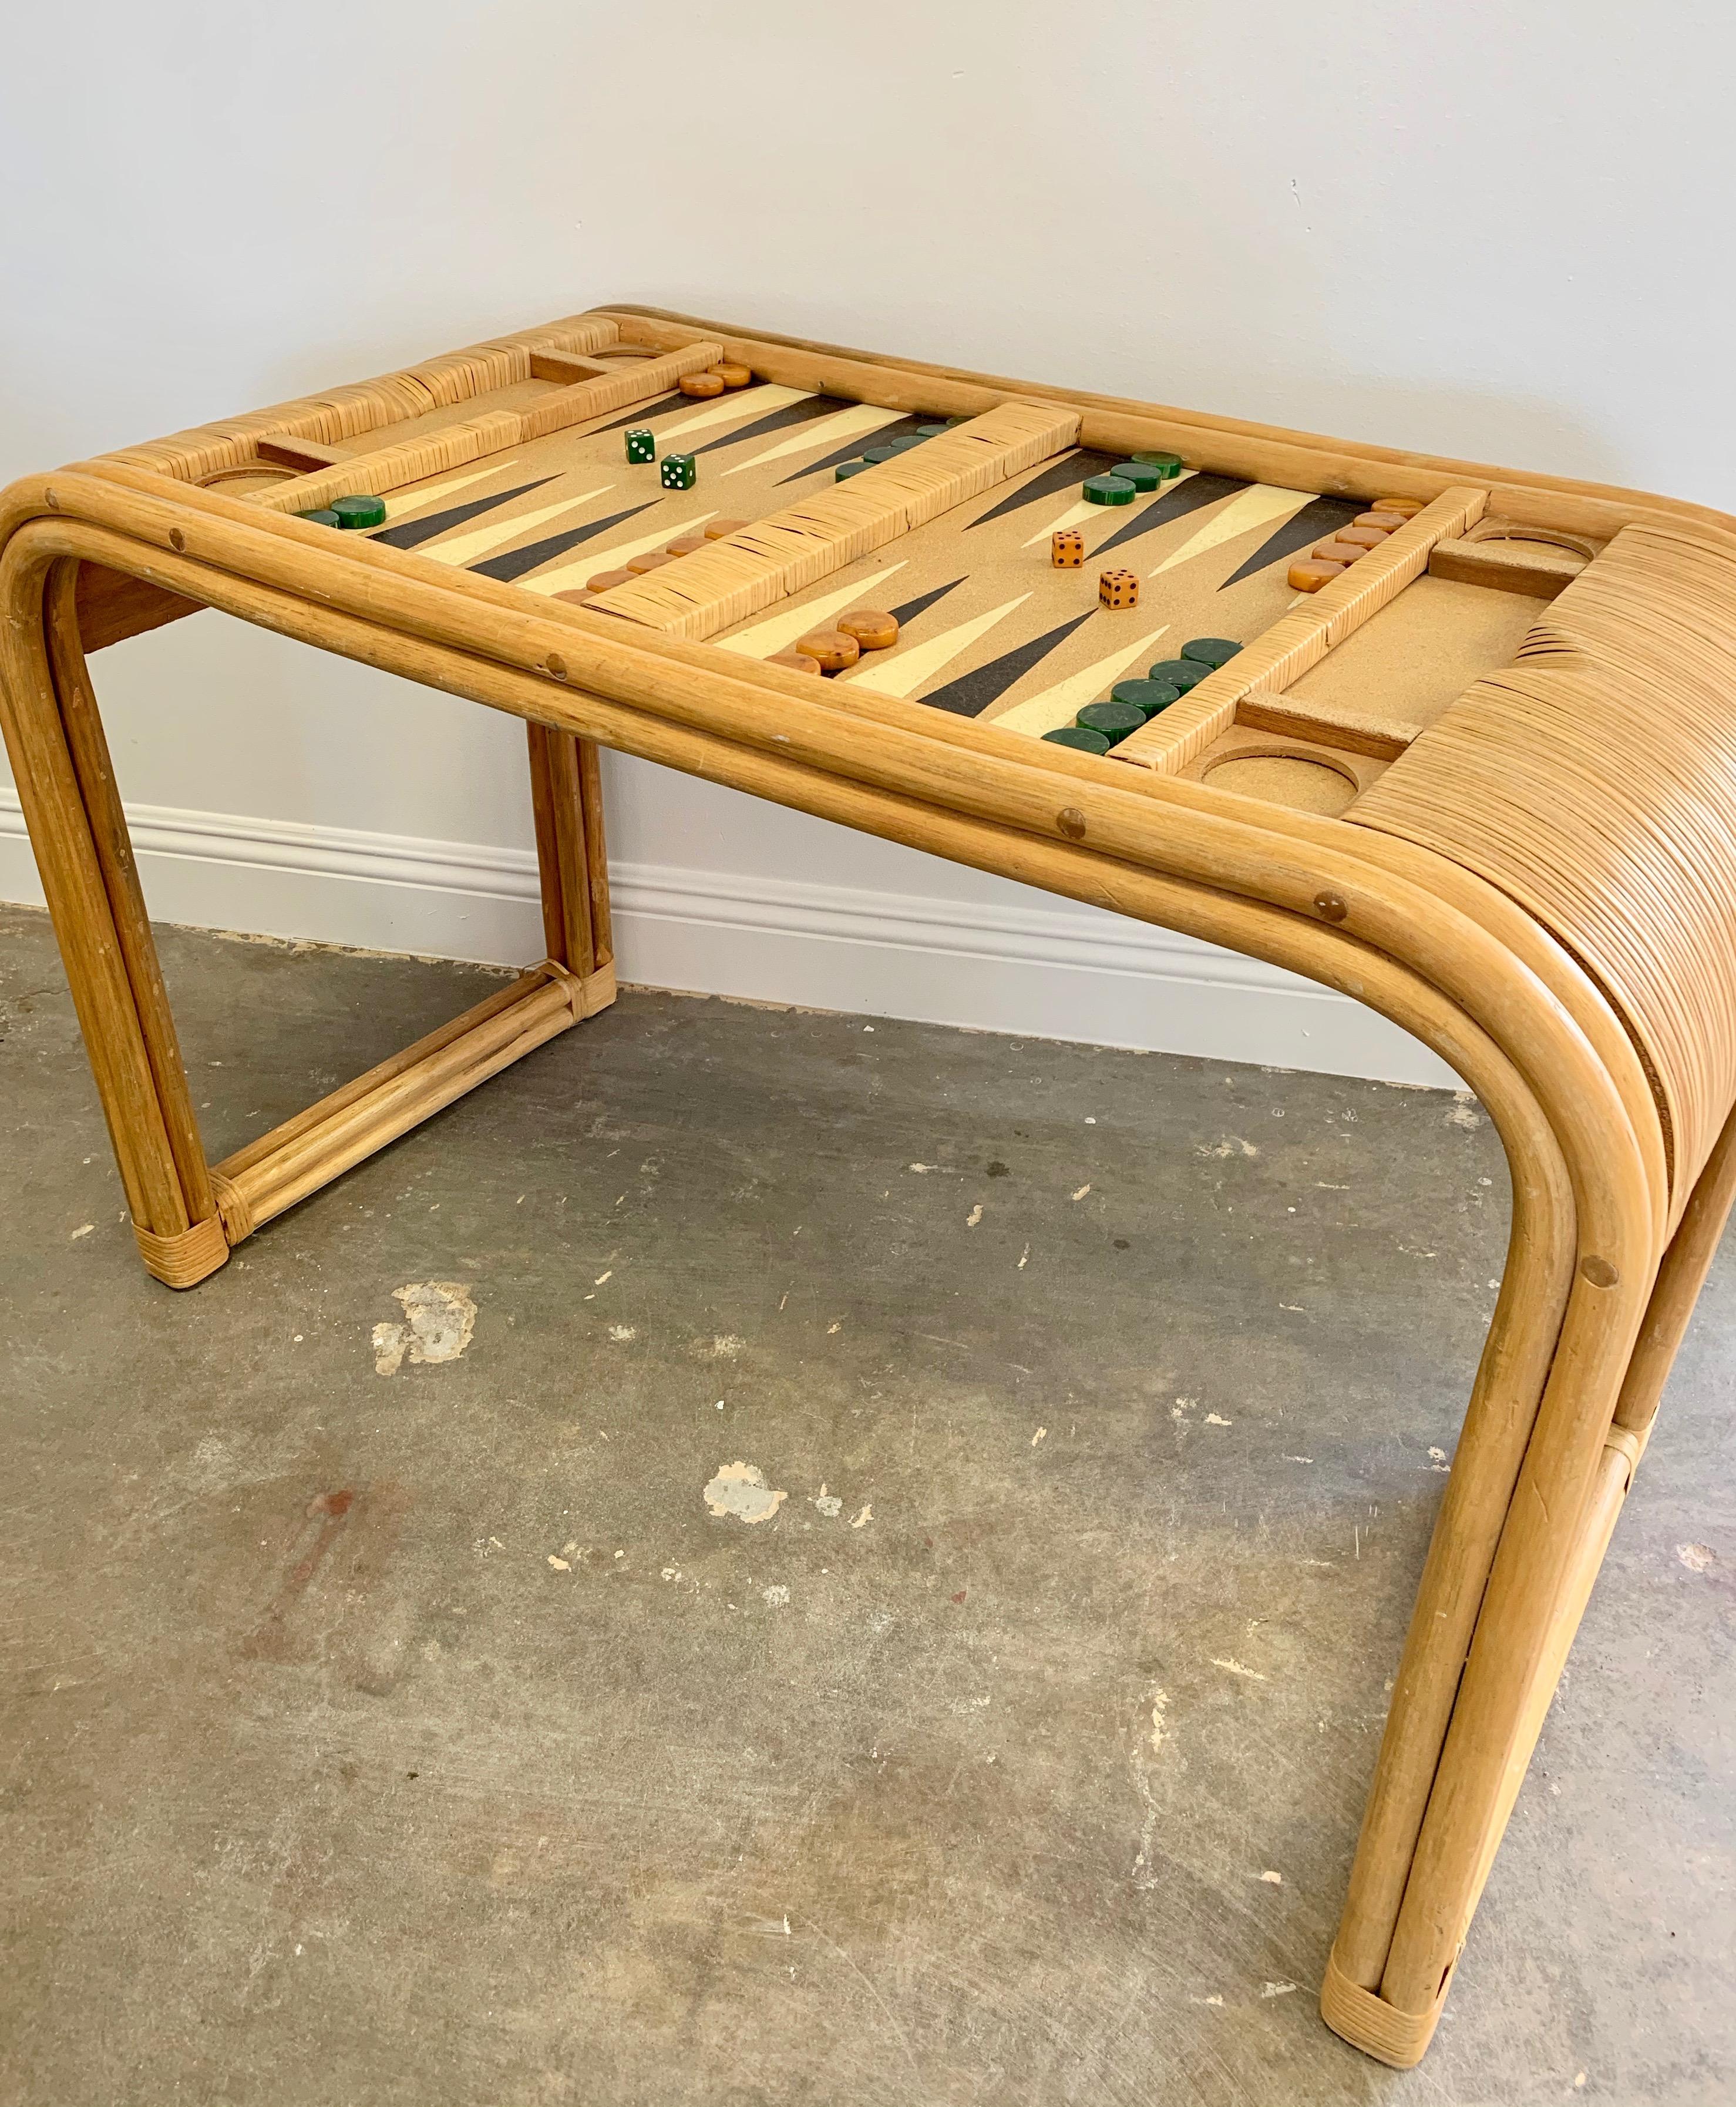 Vintage bamboo, cork and rattan backgammon table with removable glass top. Waterfall edges on both sides with inset drink holders/cubby for game pieces. Game board is made of cork. Table has bamboo frame with rattan wrapping. Good condition. Vintage